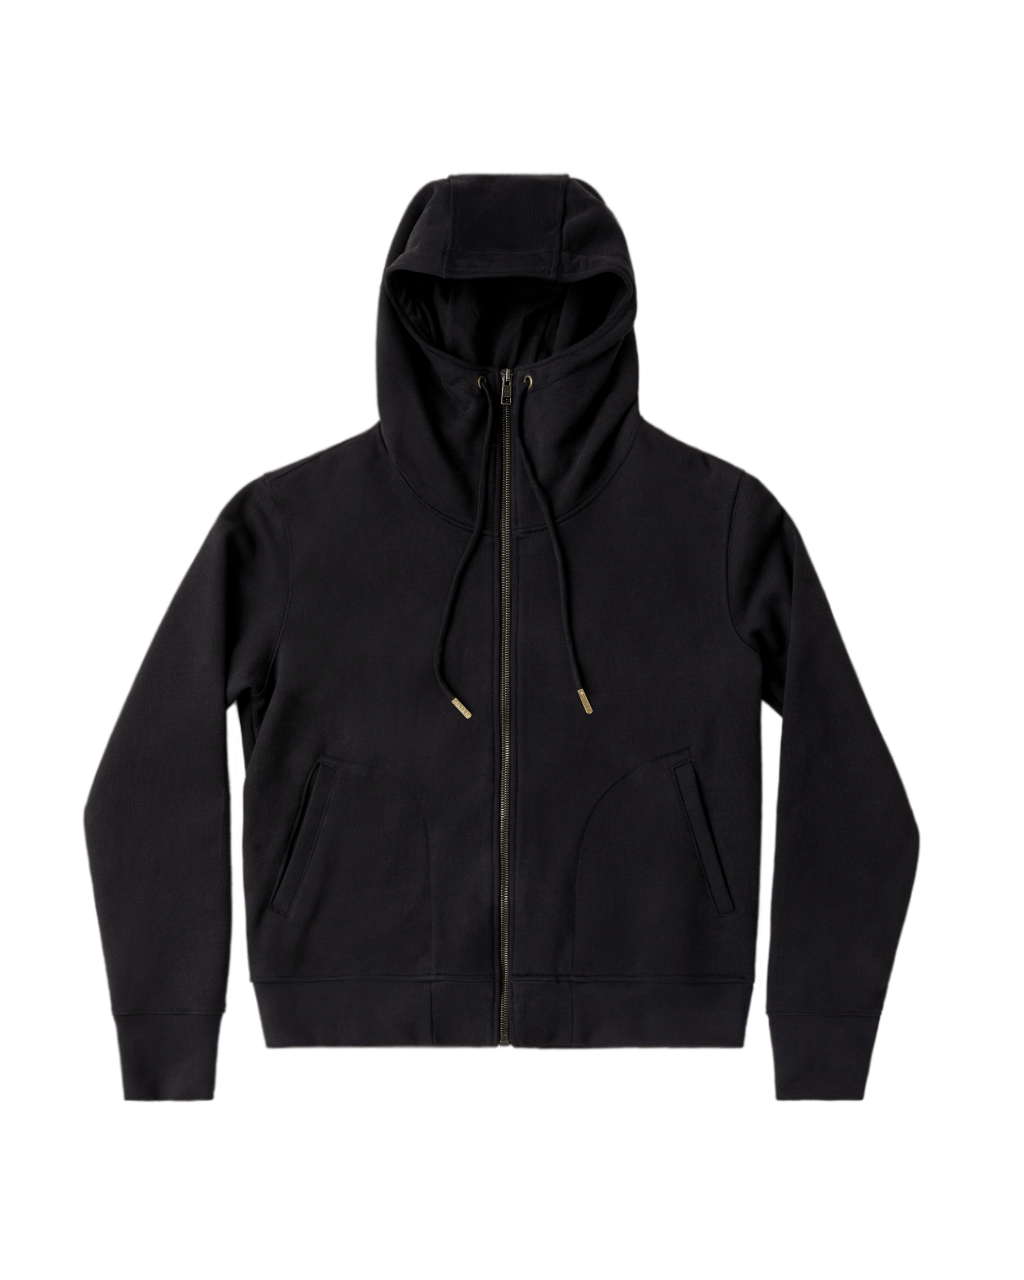 THE FOUND HOODIE